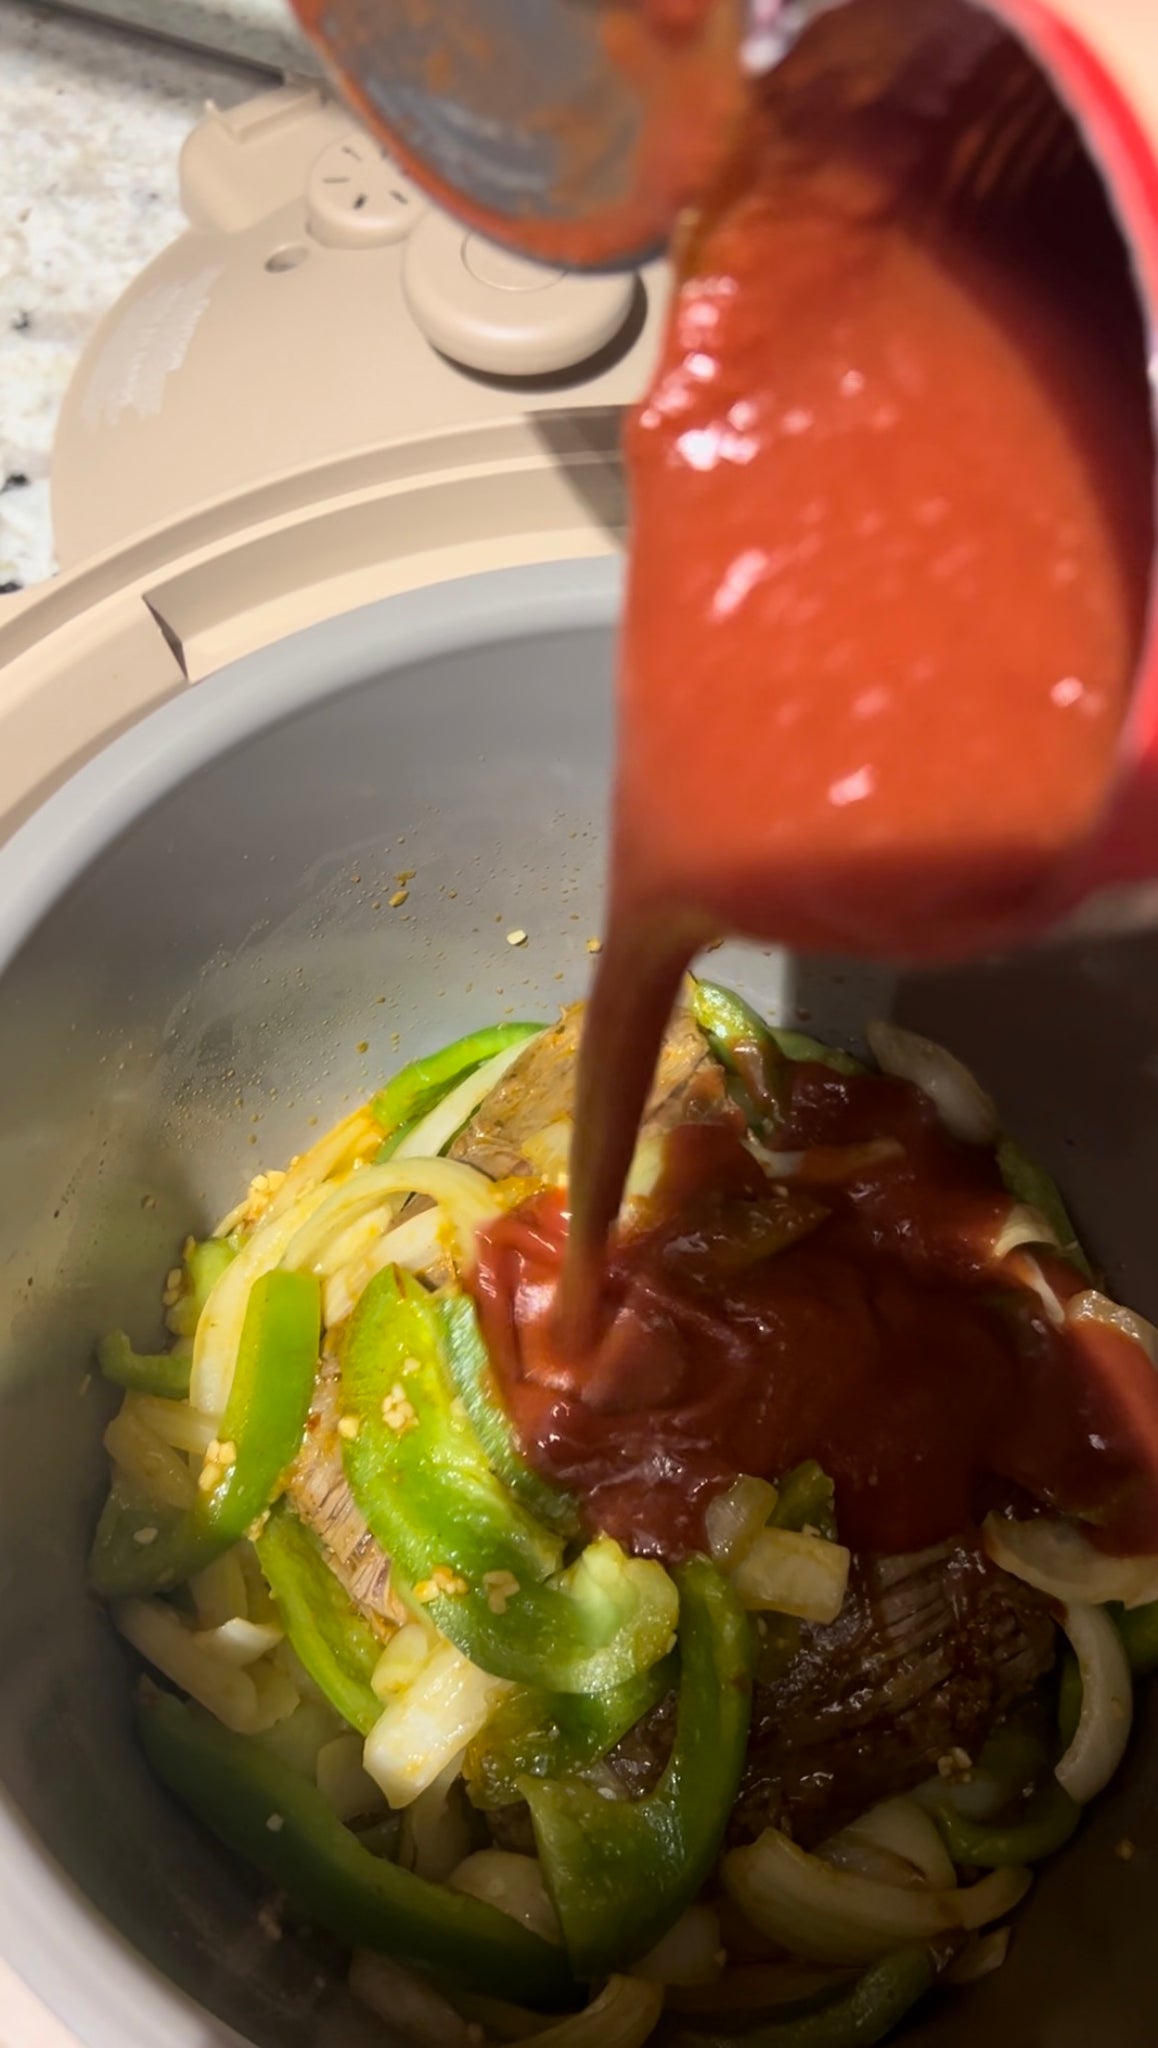 Pour tomato sauce onto ropa vieja before slow cooking